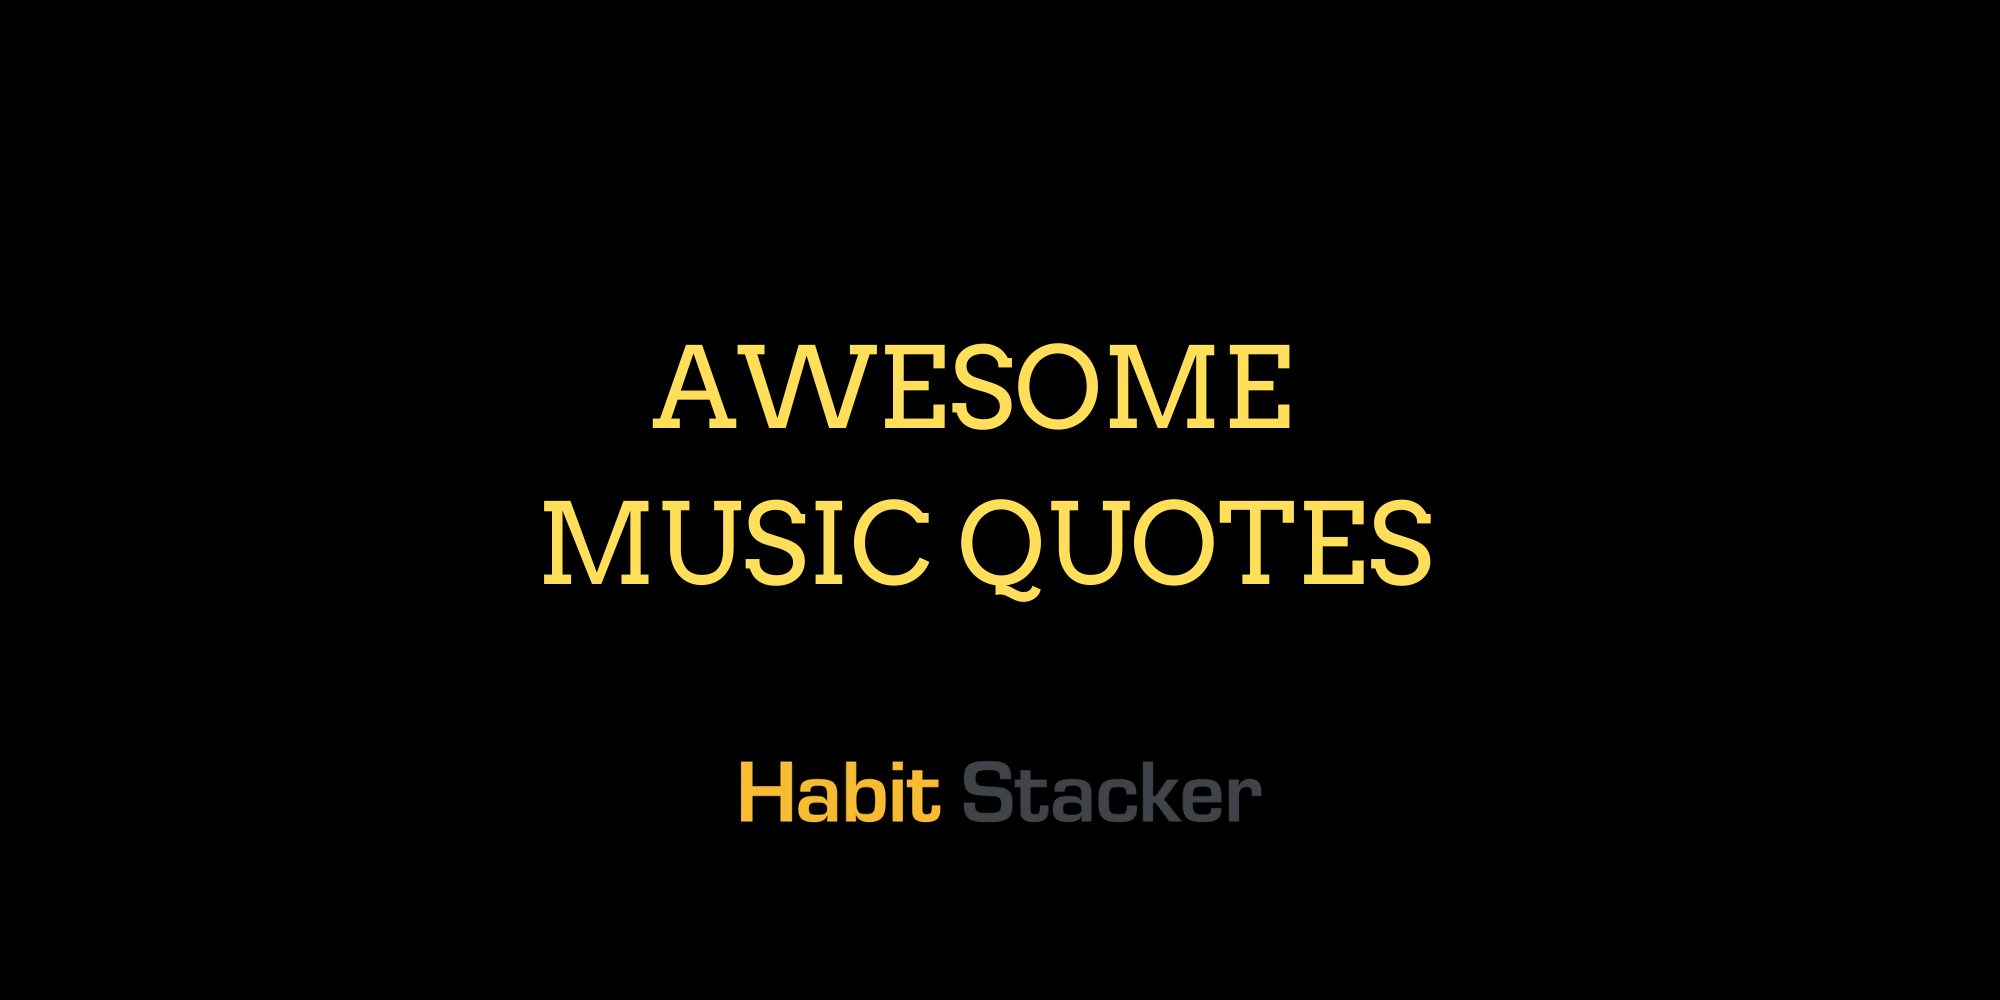 54 Awesome Music Quotes - Habit Stacker